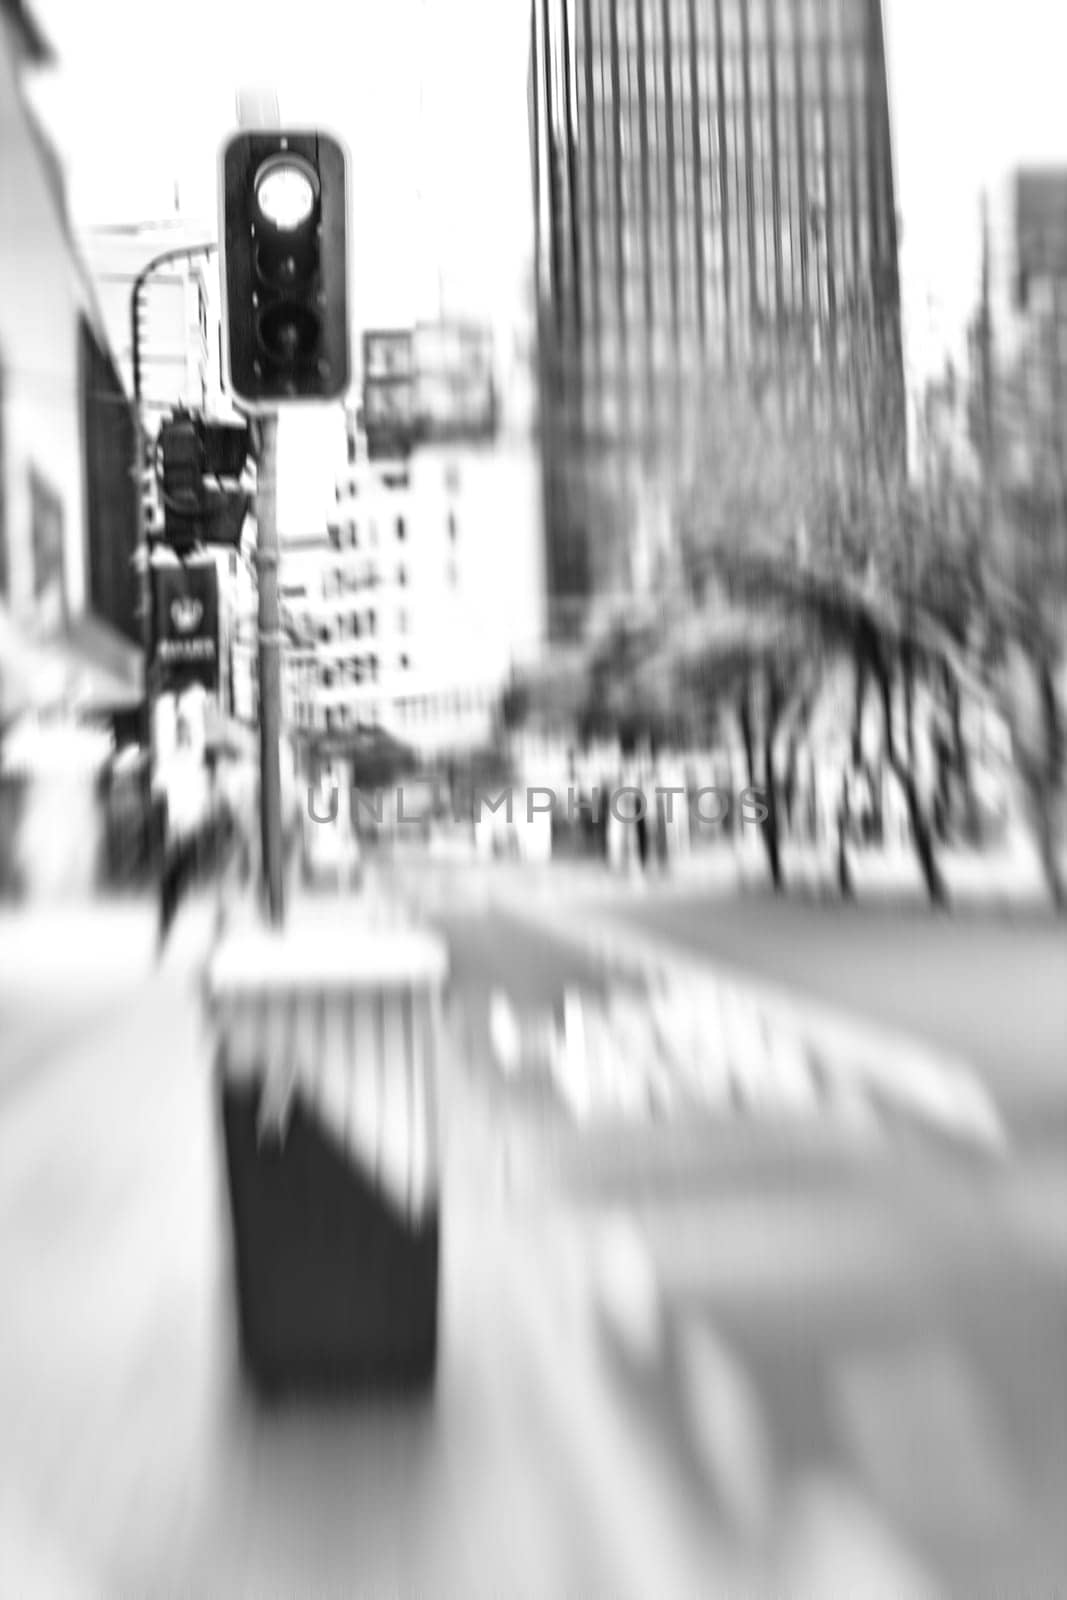 Illustration, city and drawing with sketch, blur and buildings with graphic design, black and white. Abstract, New York and artistic with travel, motion and art deco with skill, outdoor and talent.